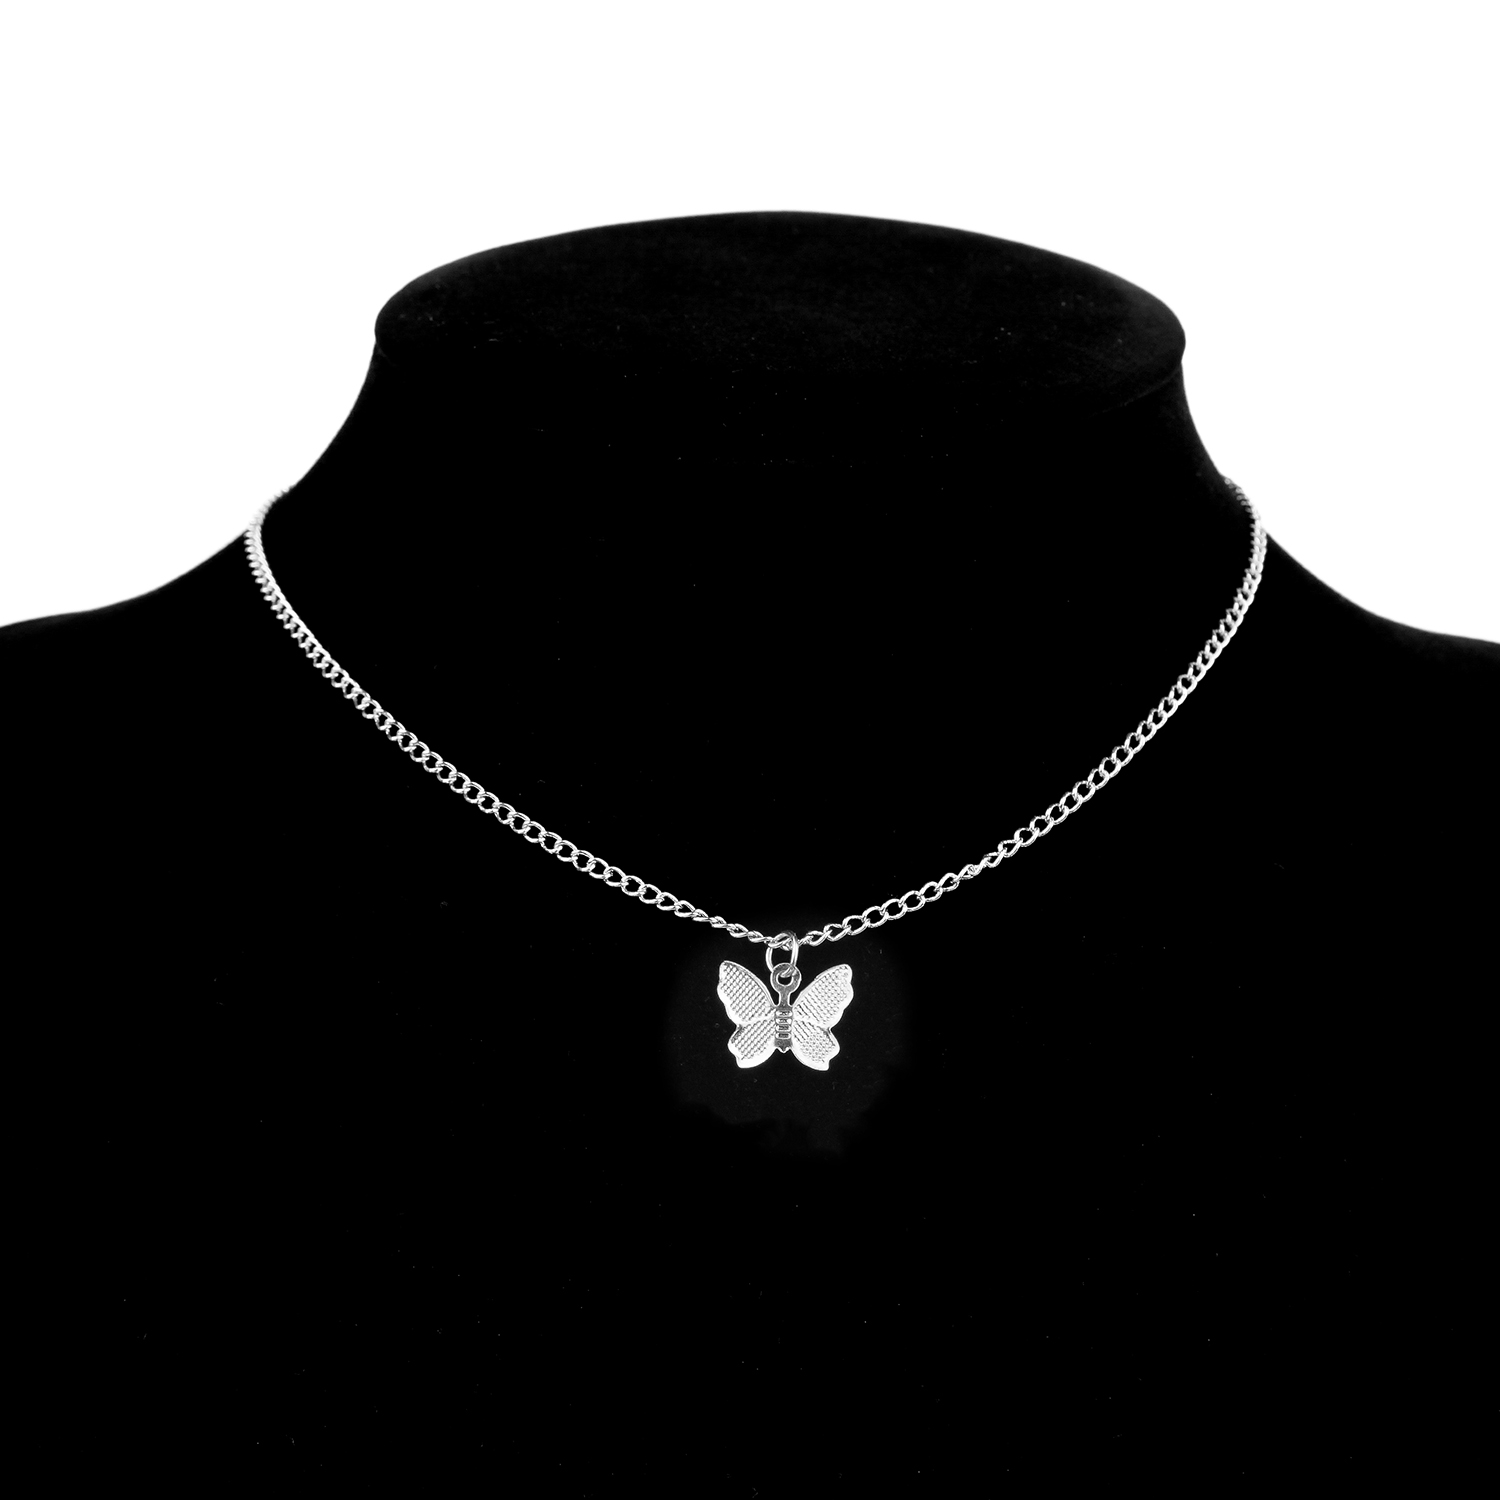 Gold Chain Butterfly Pendant Choker Necklace Women Statement Collares Bohemian Beach Jewelry Gift Collier Cheap